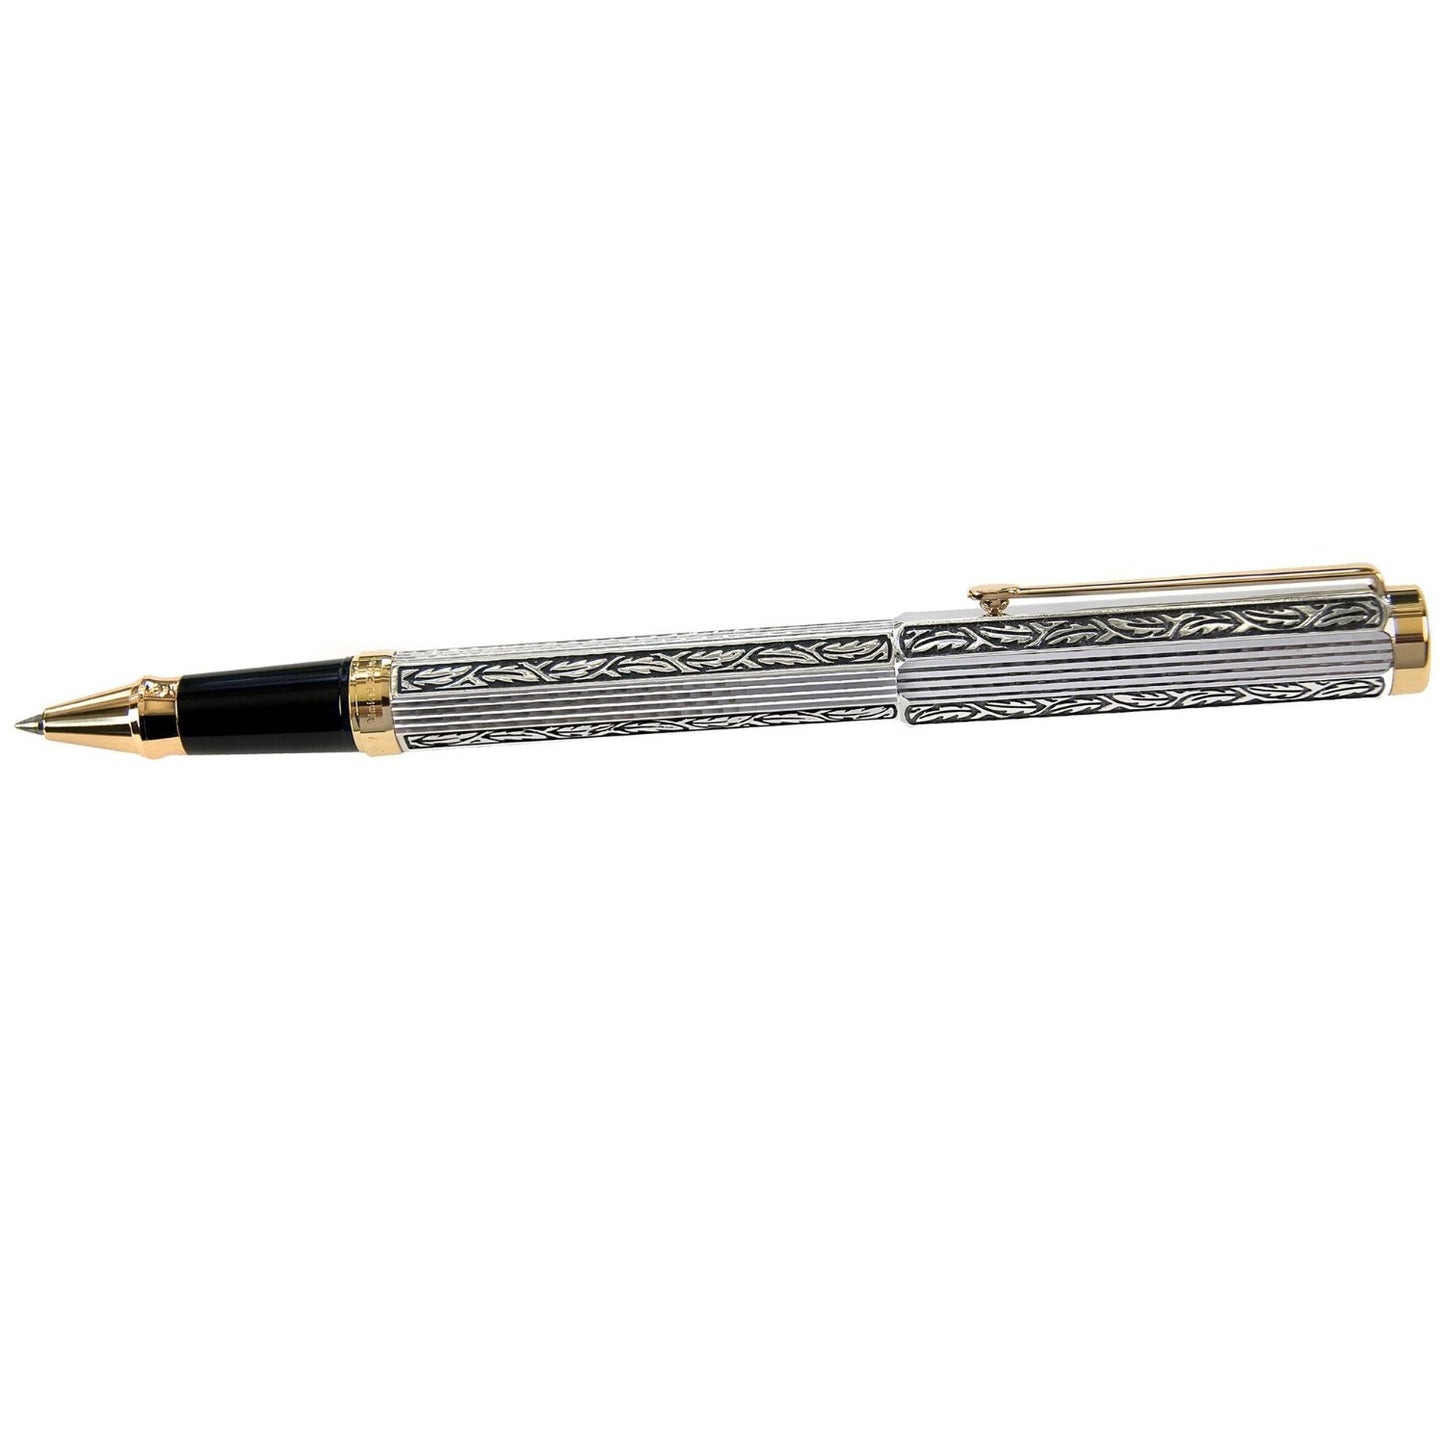 Xezo - Side view of the Legionnaire 500 R-1 rollerball pen